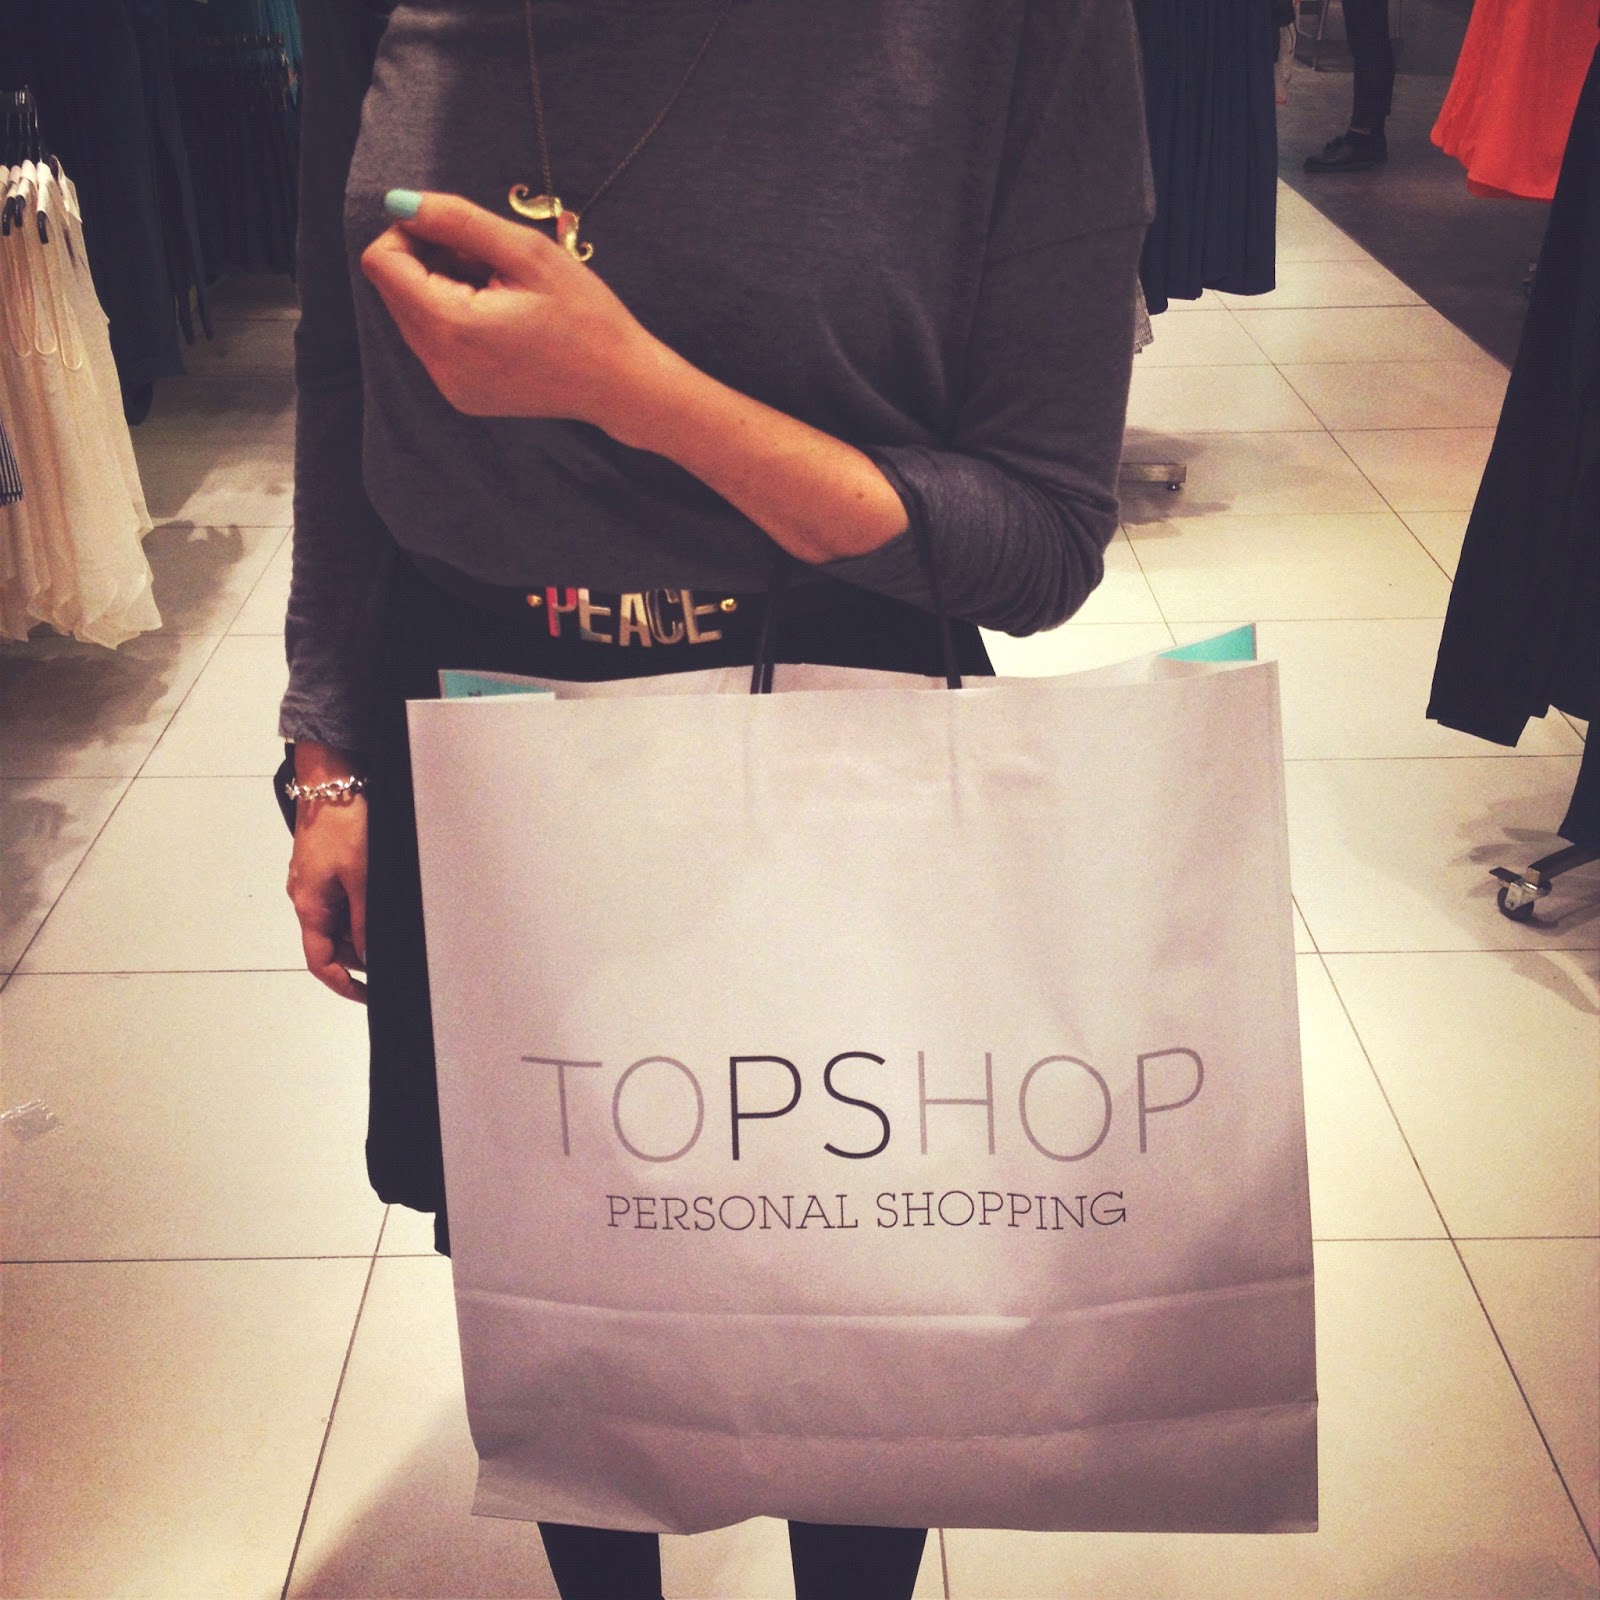 TOPSHOP PERSONAL SHOPPING EVENT